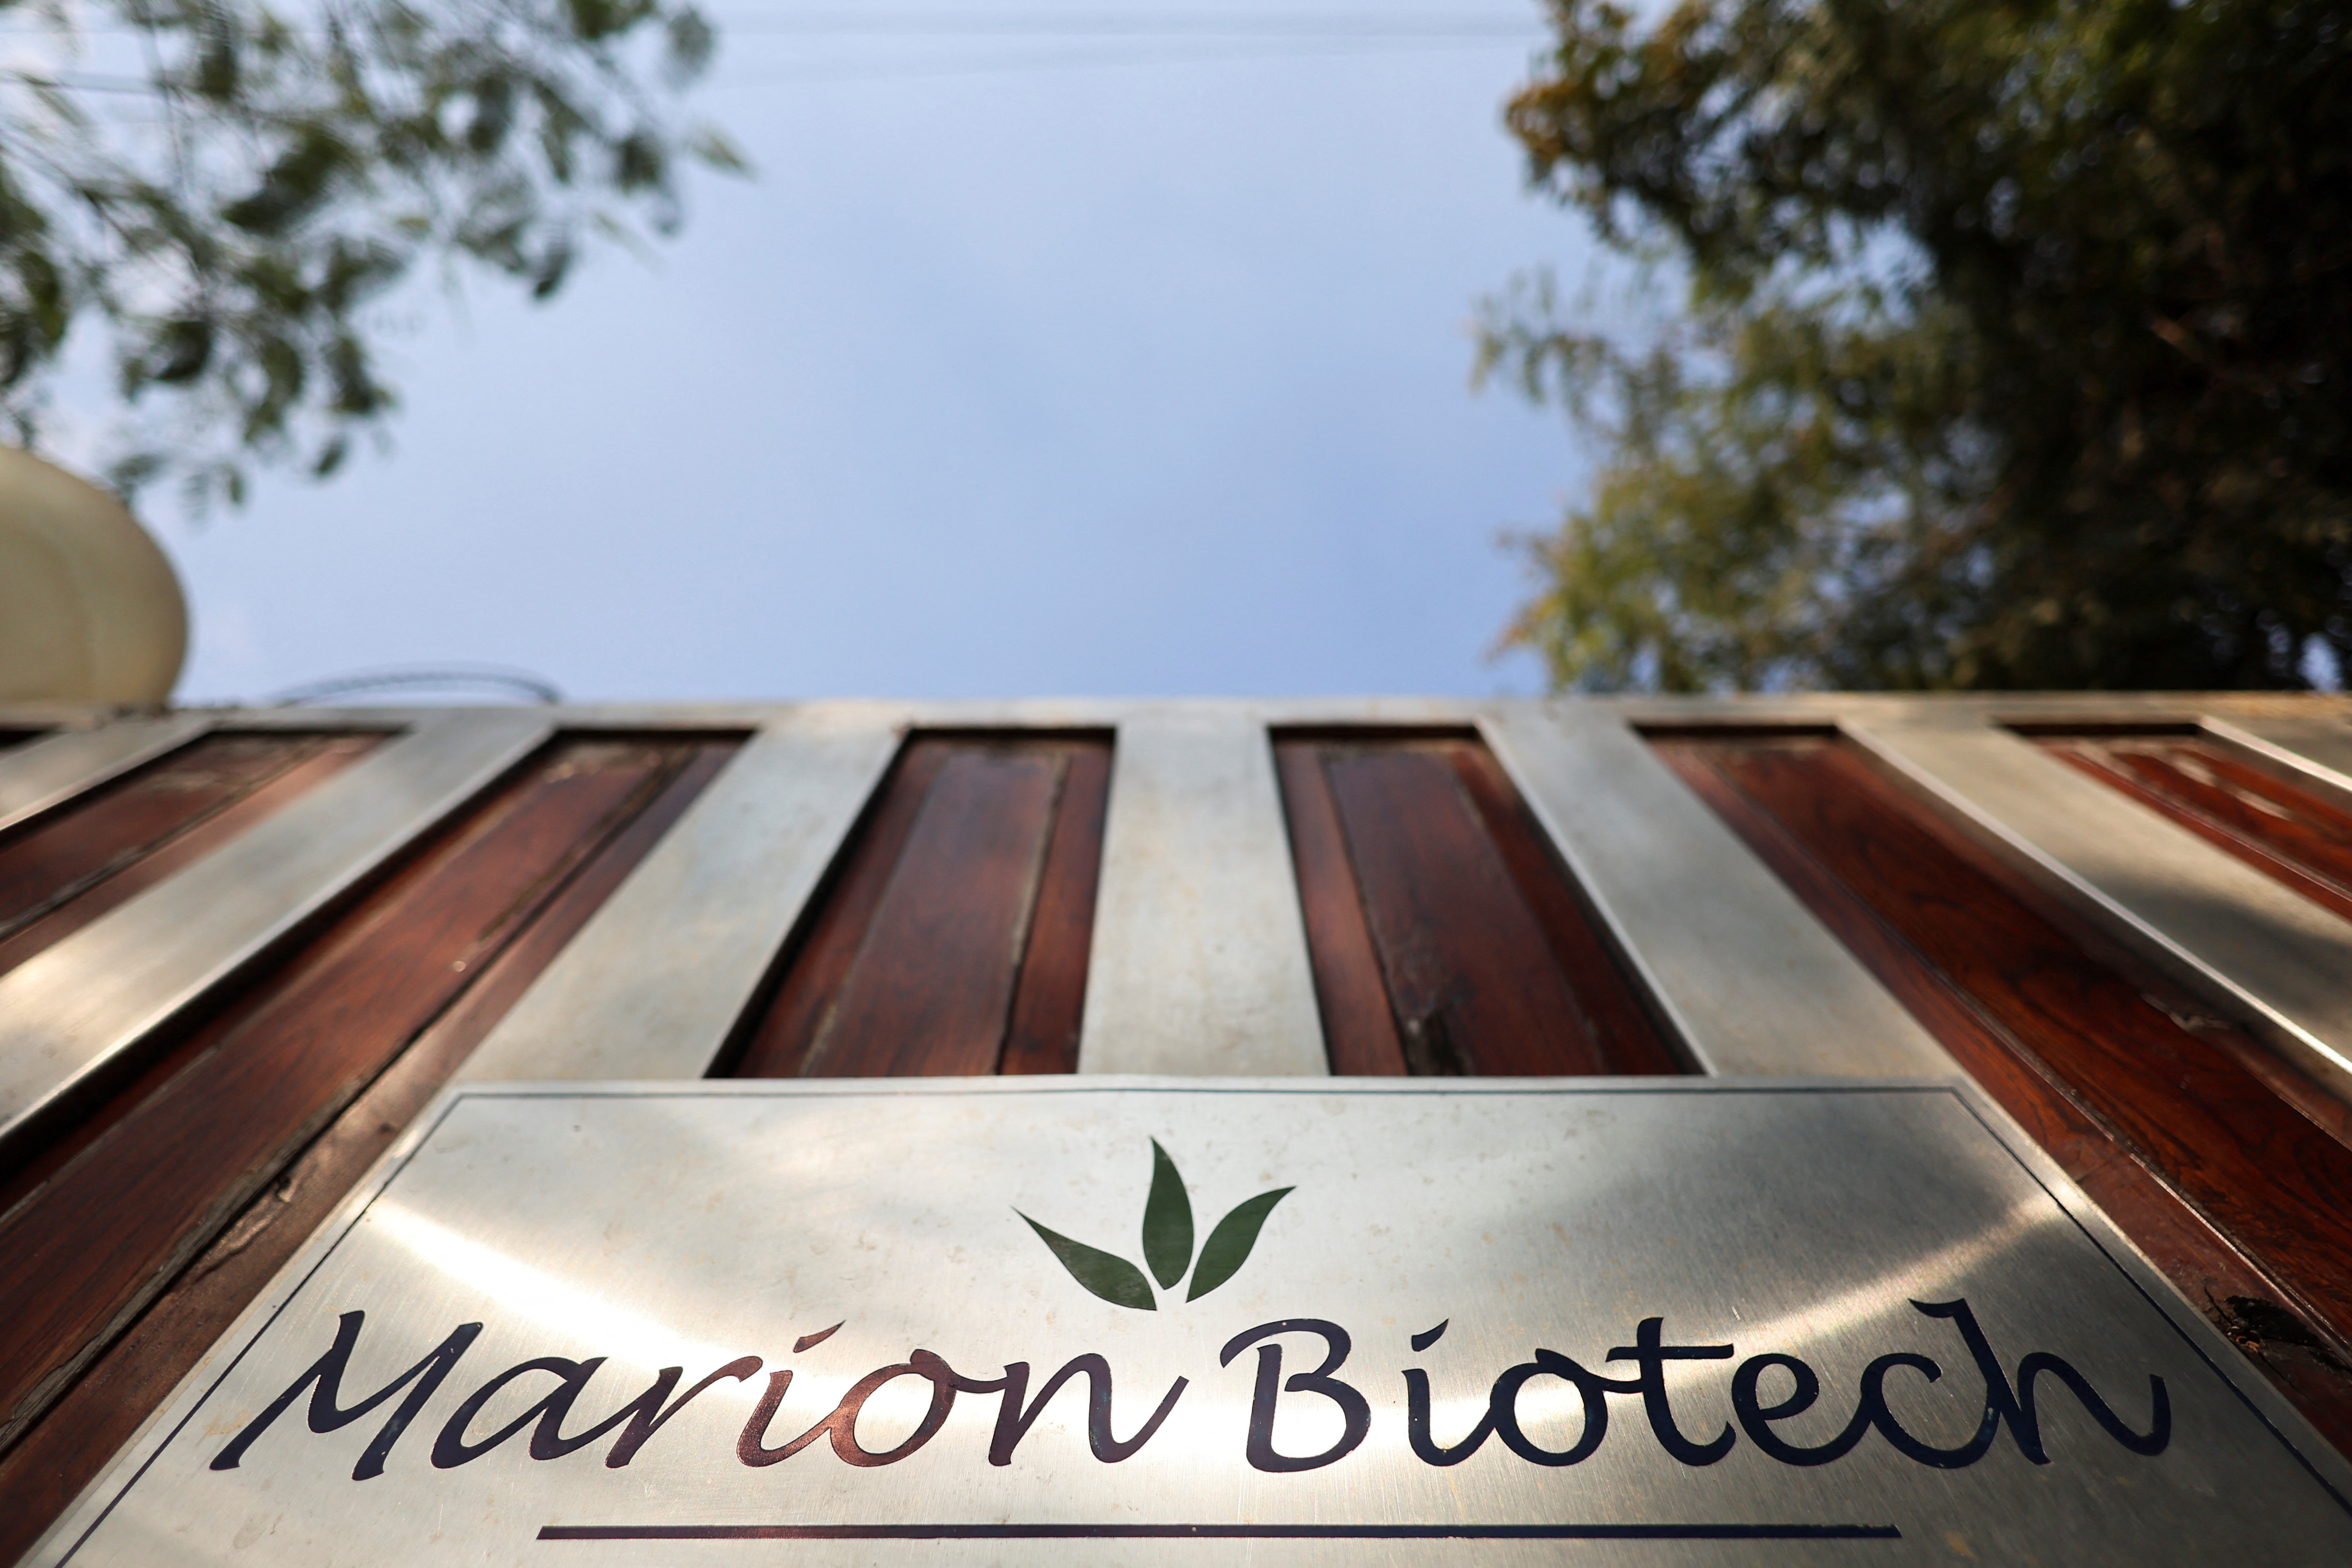 The logo of Marion Biotech, a healthcare and pharmaceutical company, is visible on a gate outside his office in Noida.